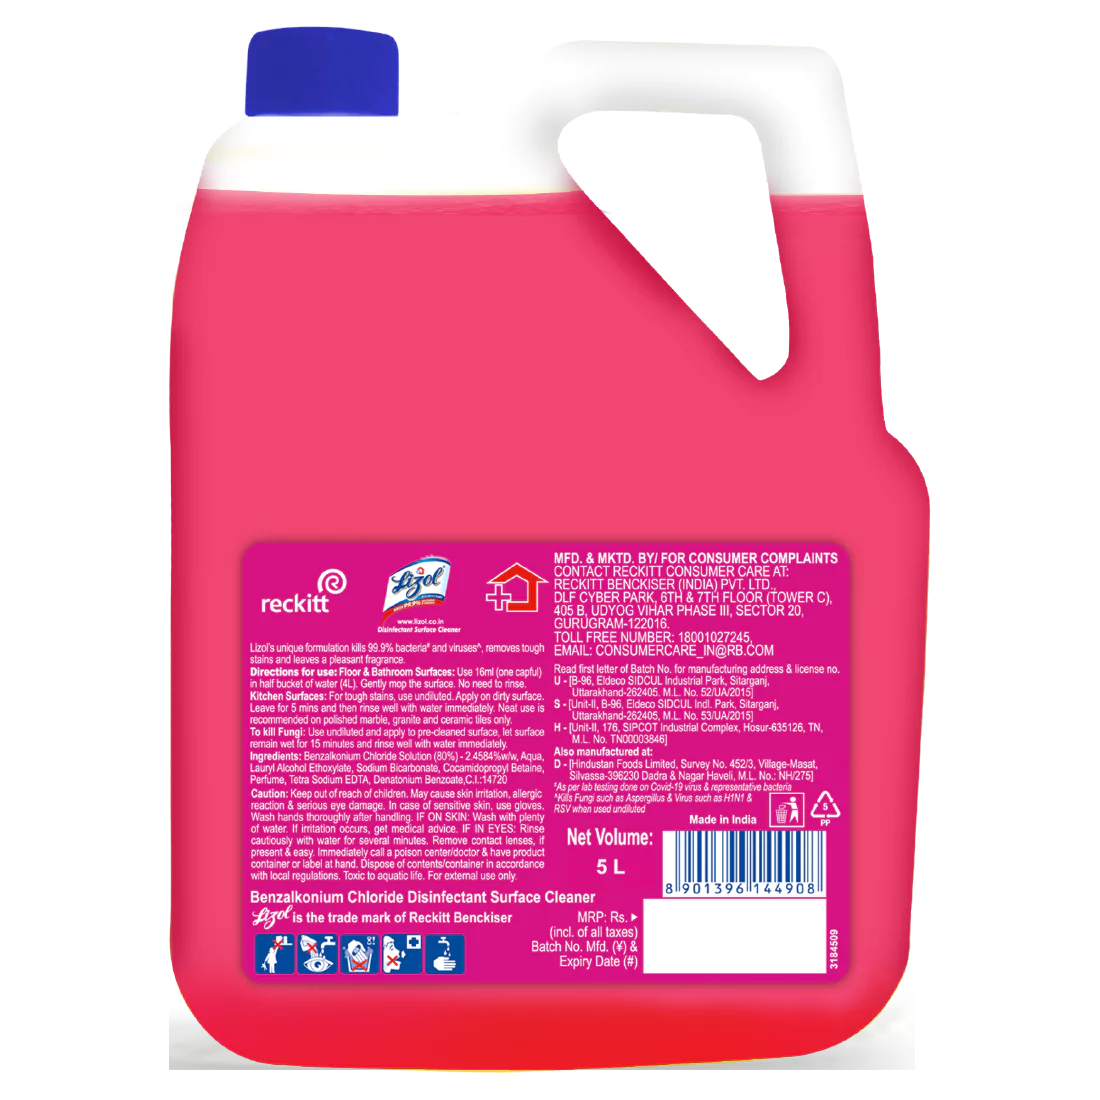 Lizol Disinfectant Surface Cleaner, Floral, 5L